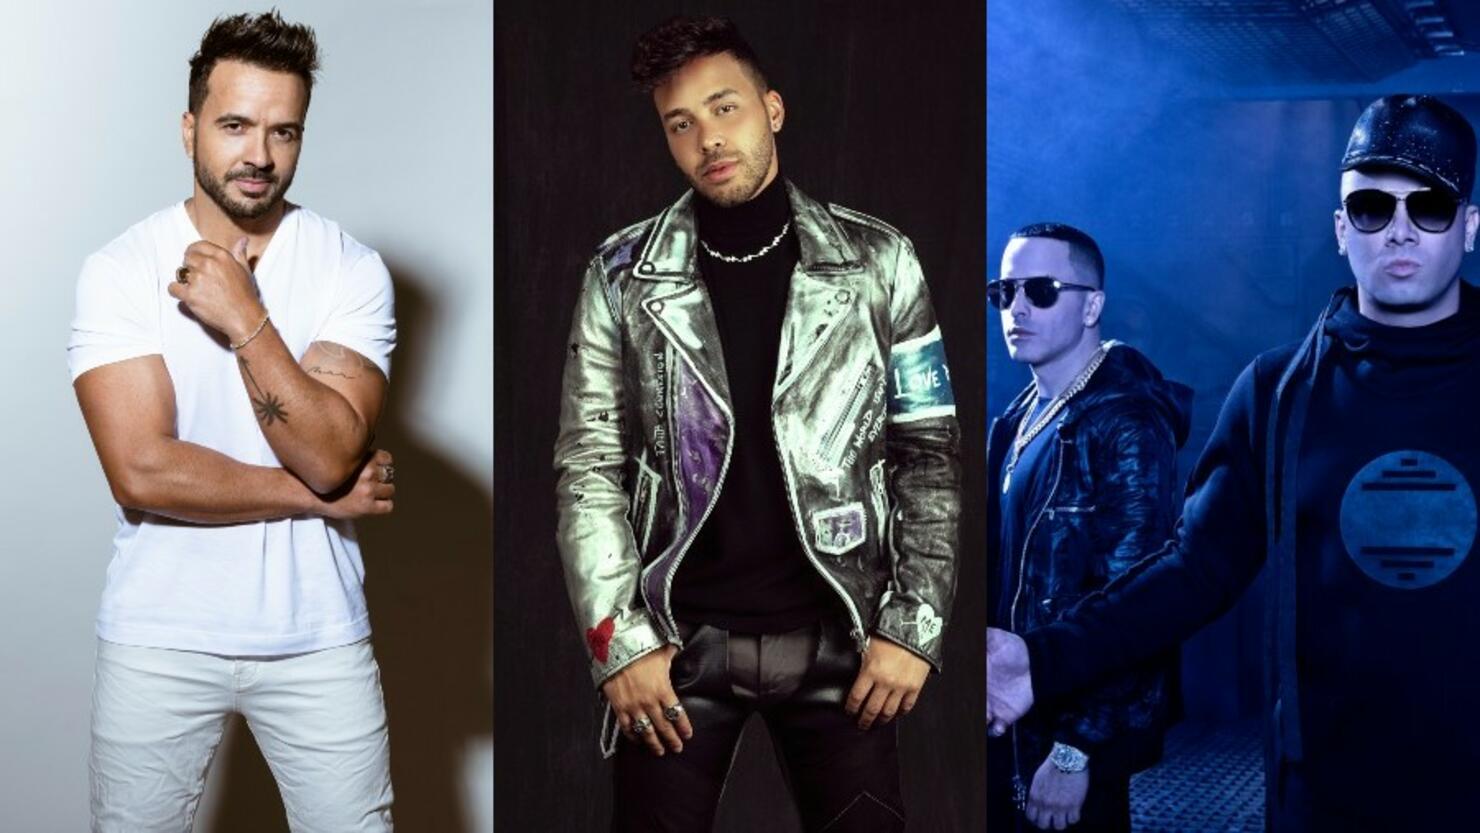 2021 iHeartRadio Fiesta Latina Returns This October See The Lineup